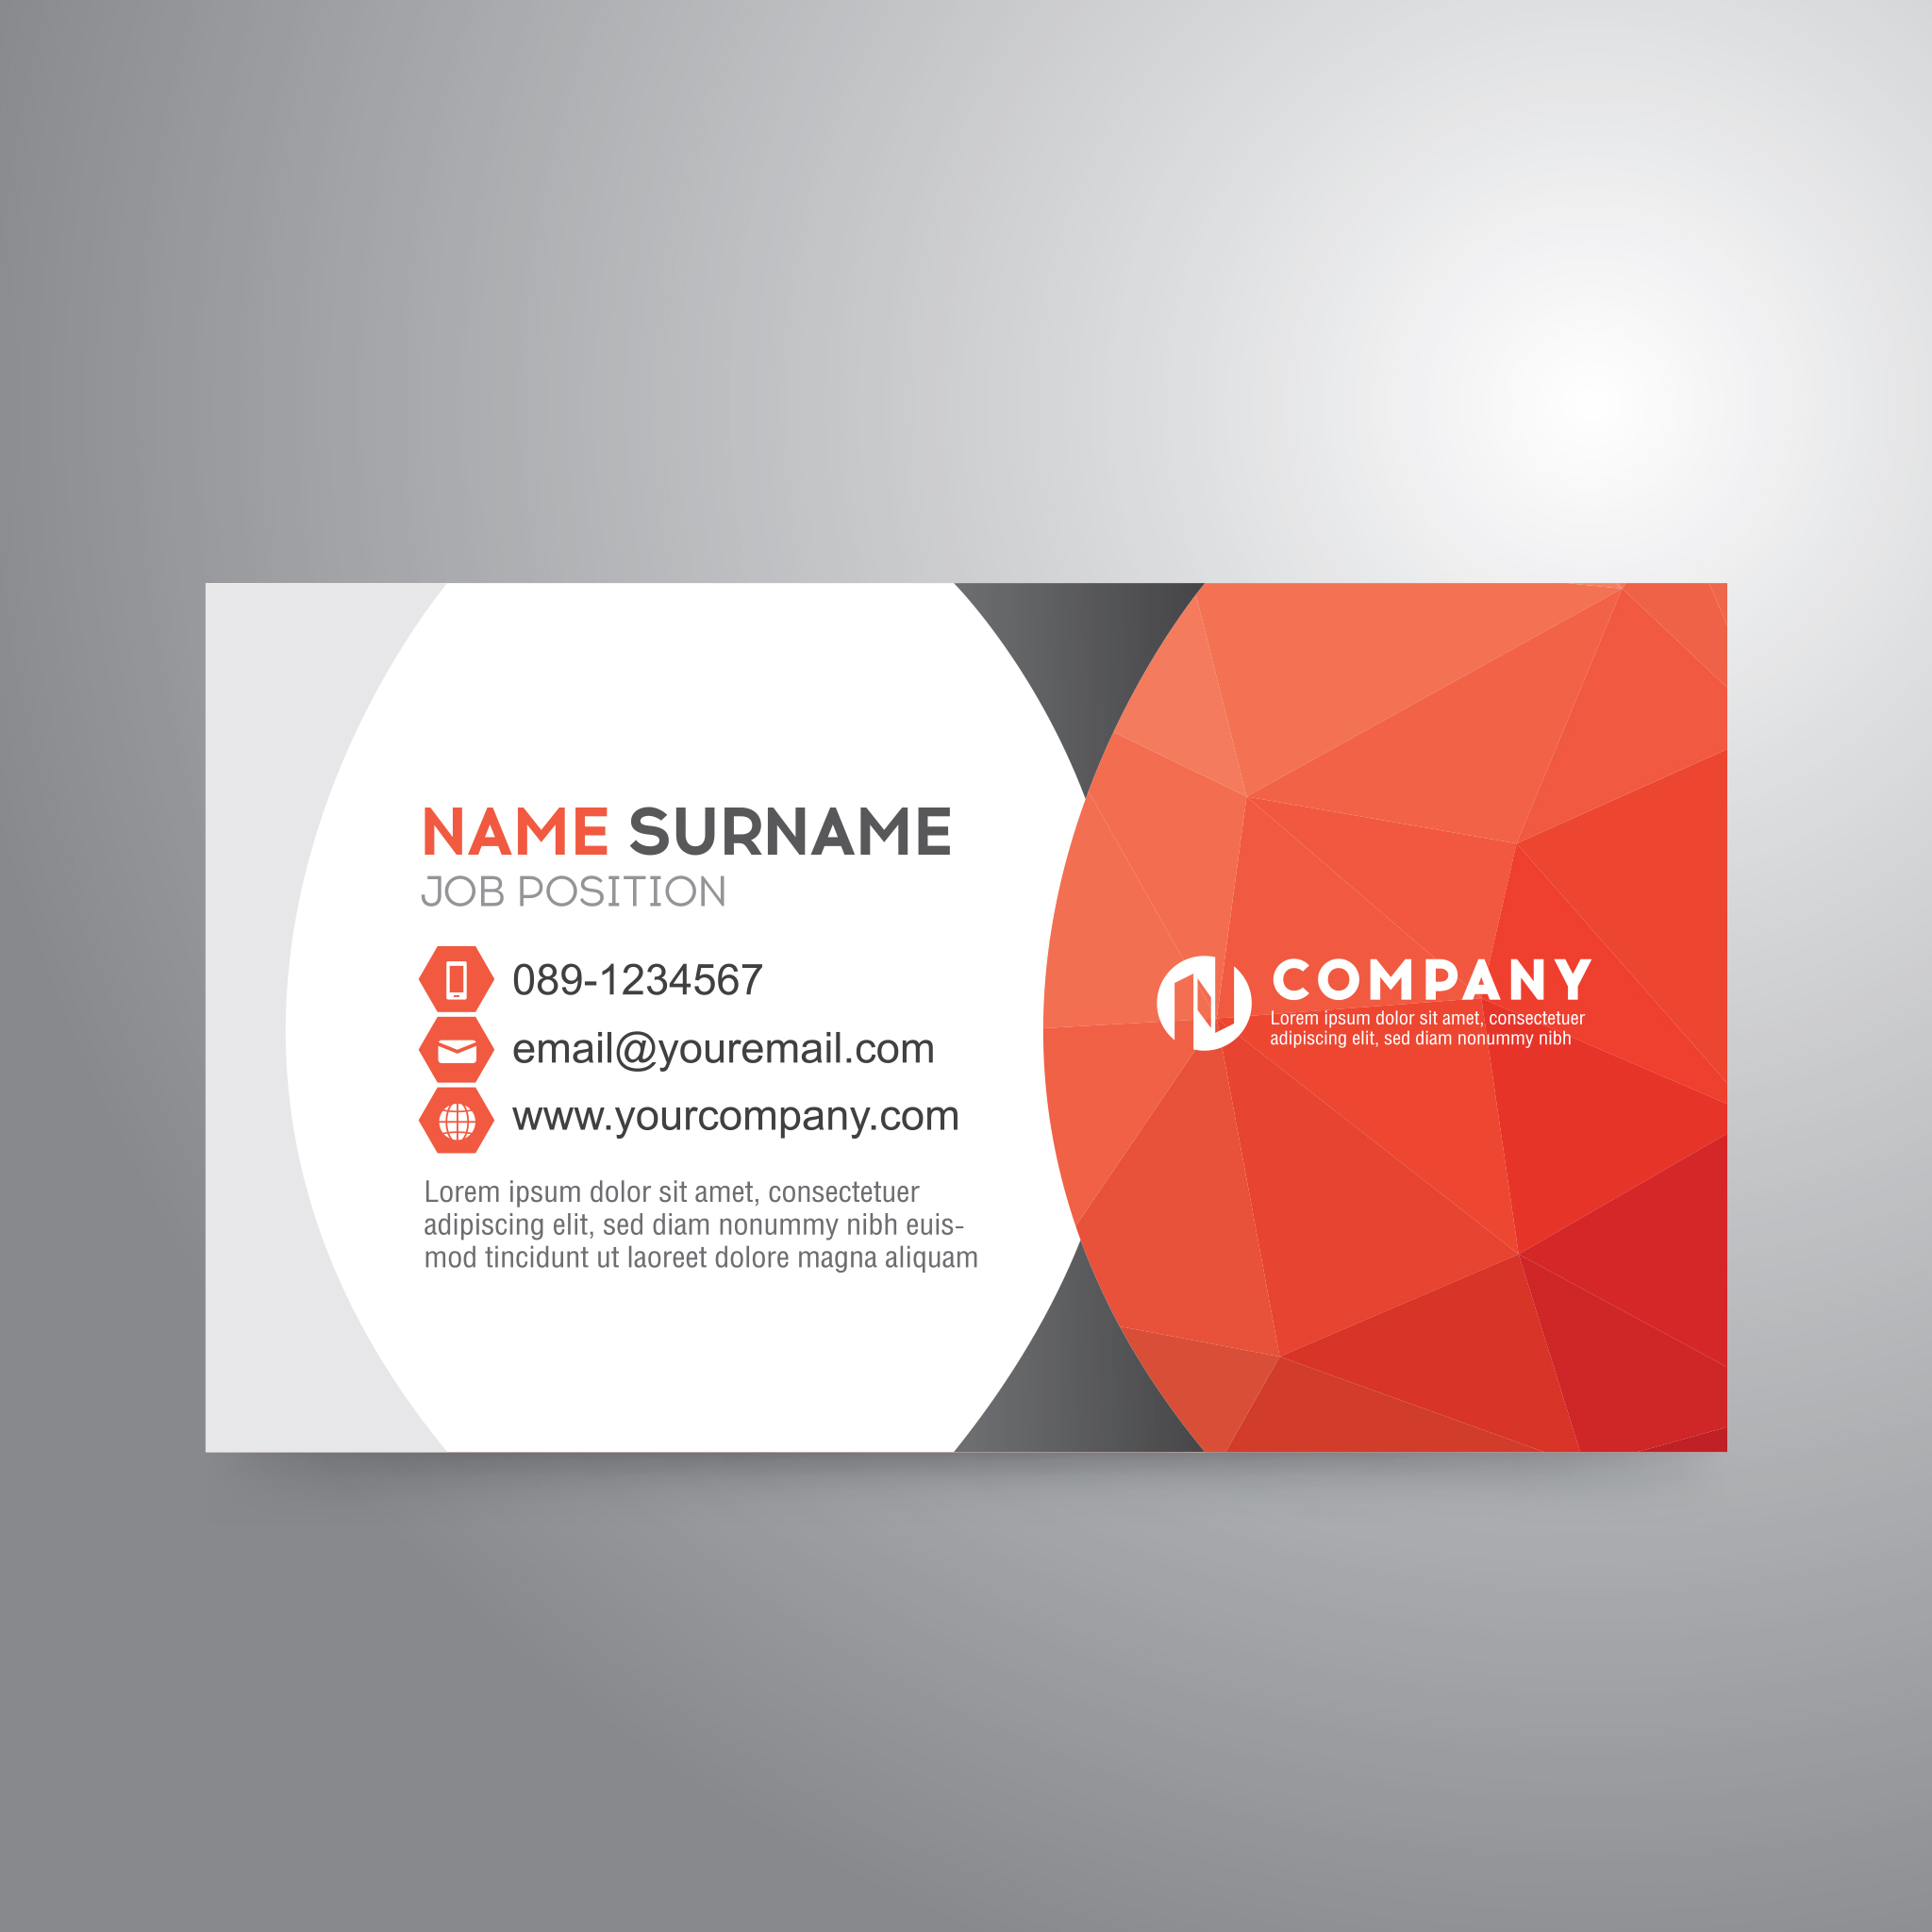 Magnetic Business Cards